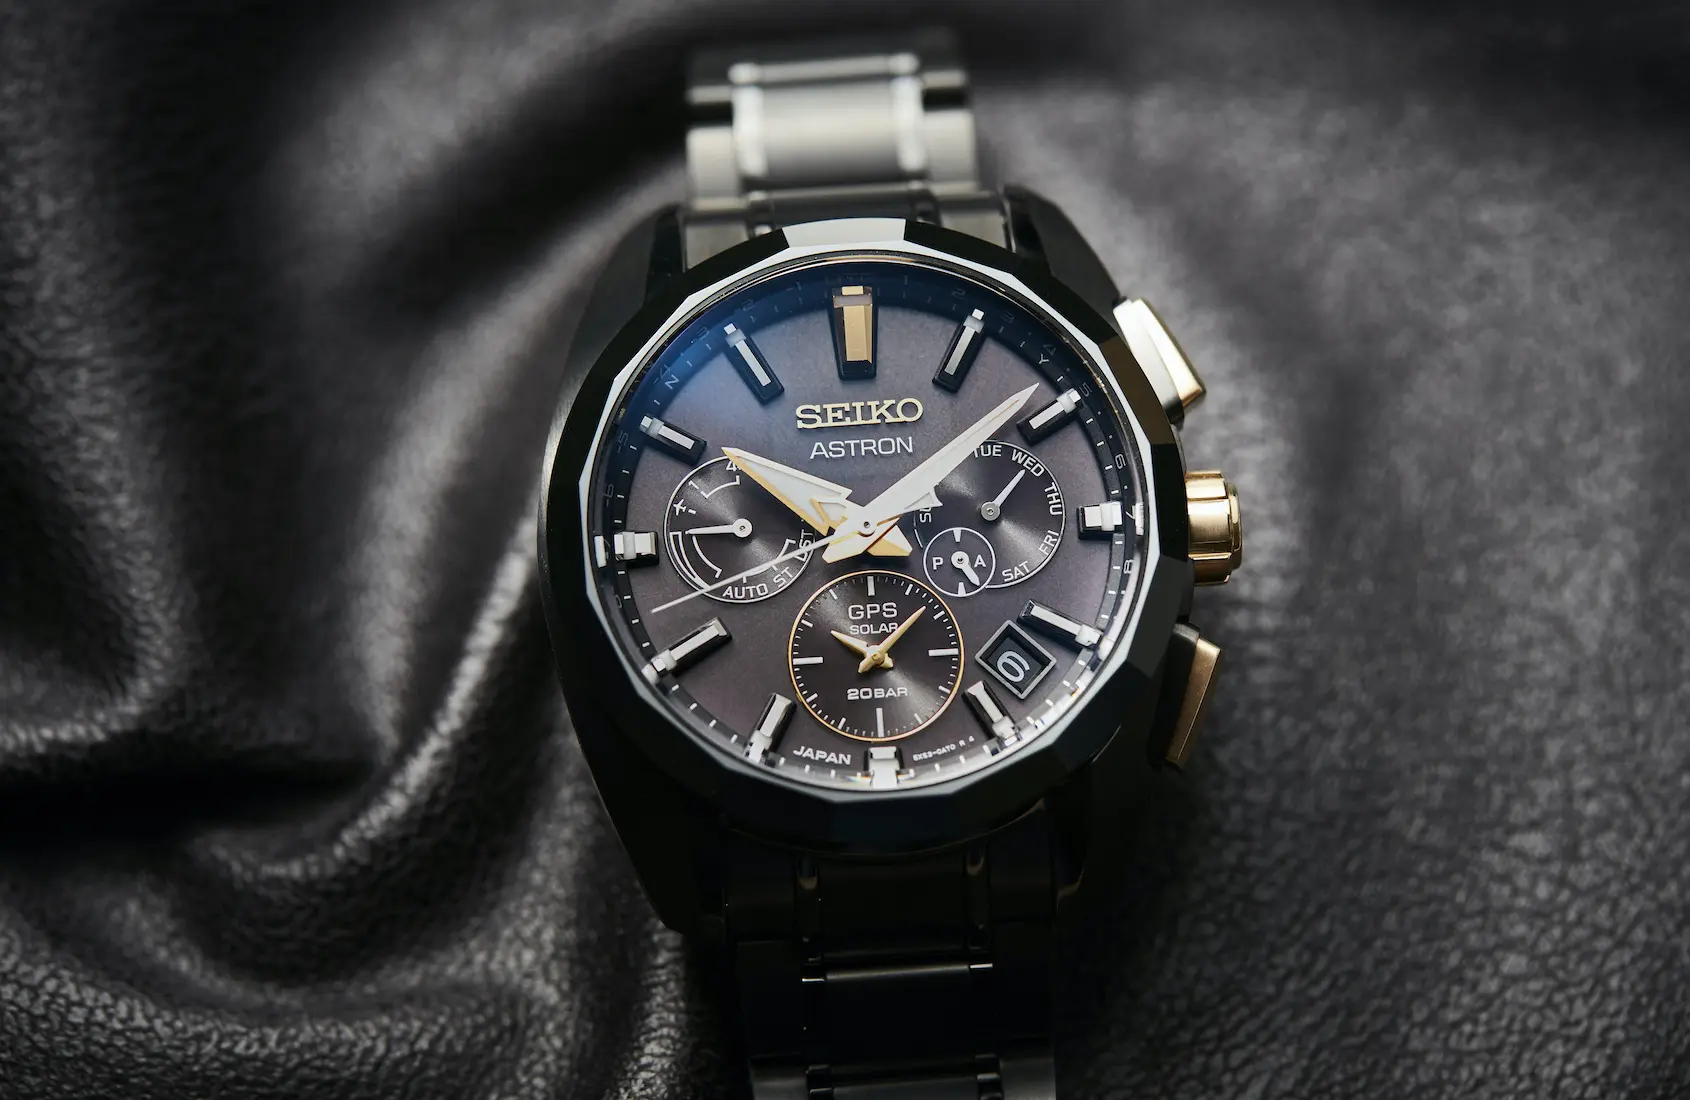 INTRODUCING: The Seiko Astron SSH073J Edition offers dressy darkness in ceramic - Time and Tide Watches